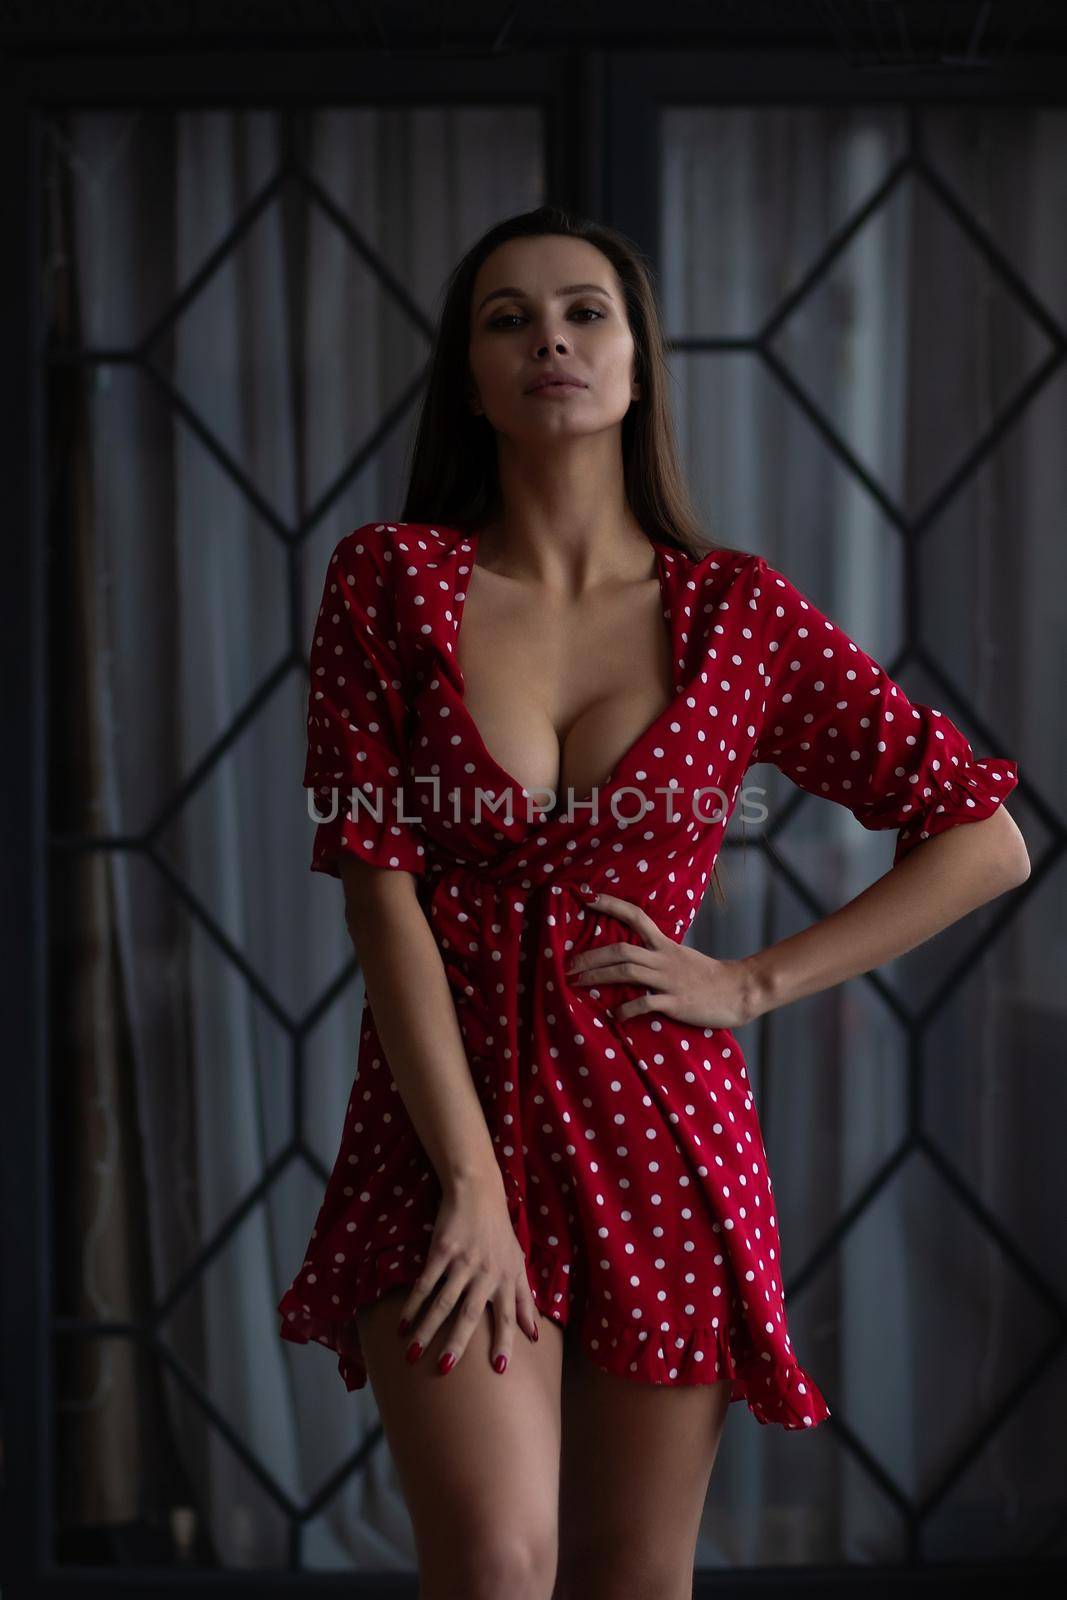 Self esteem young female with long hair in stylish mini dress with decollete standing in dark bedroom with hand on waist and looking at camera